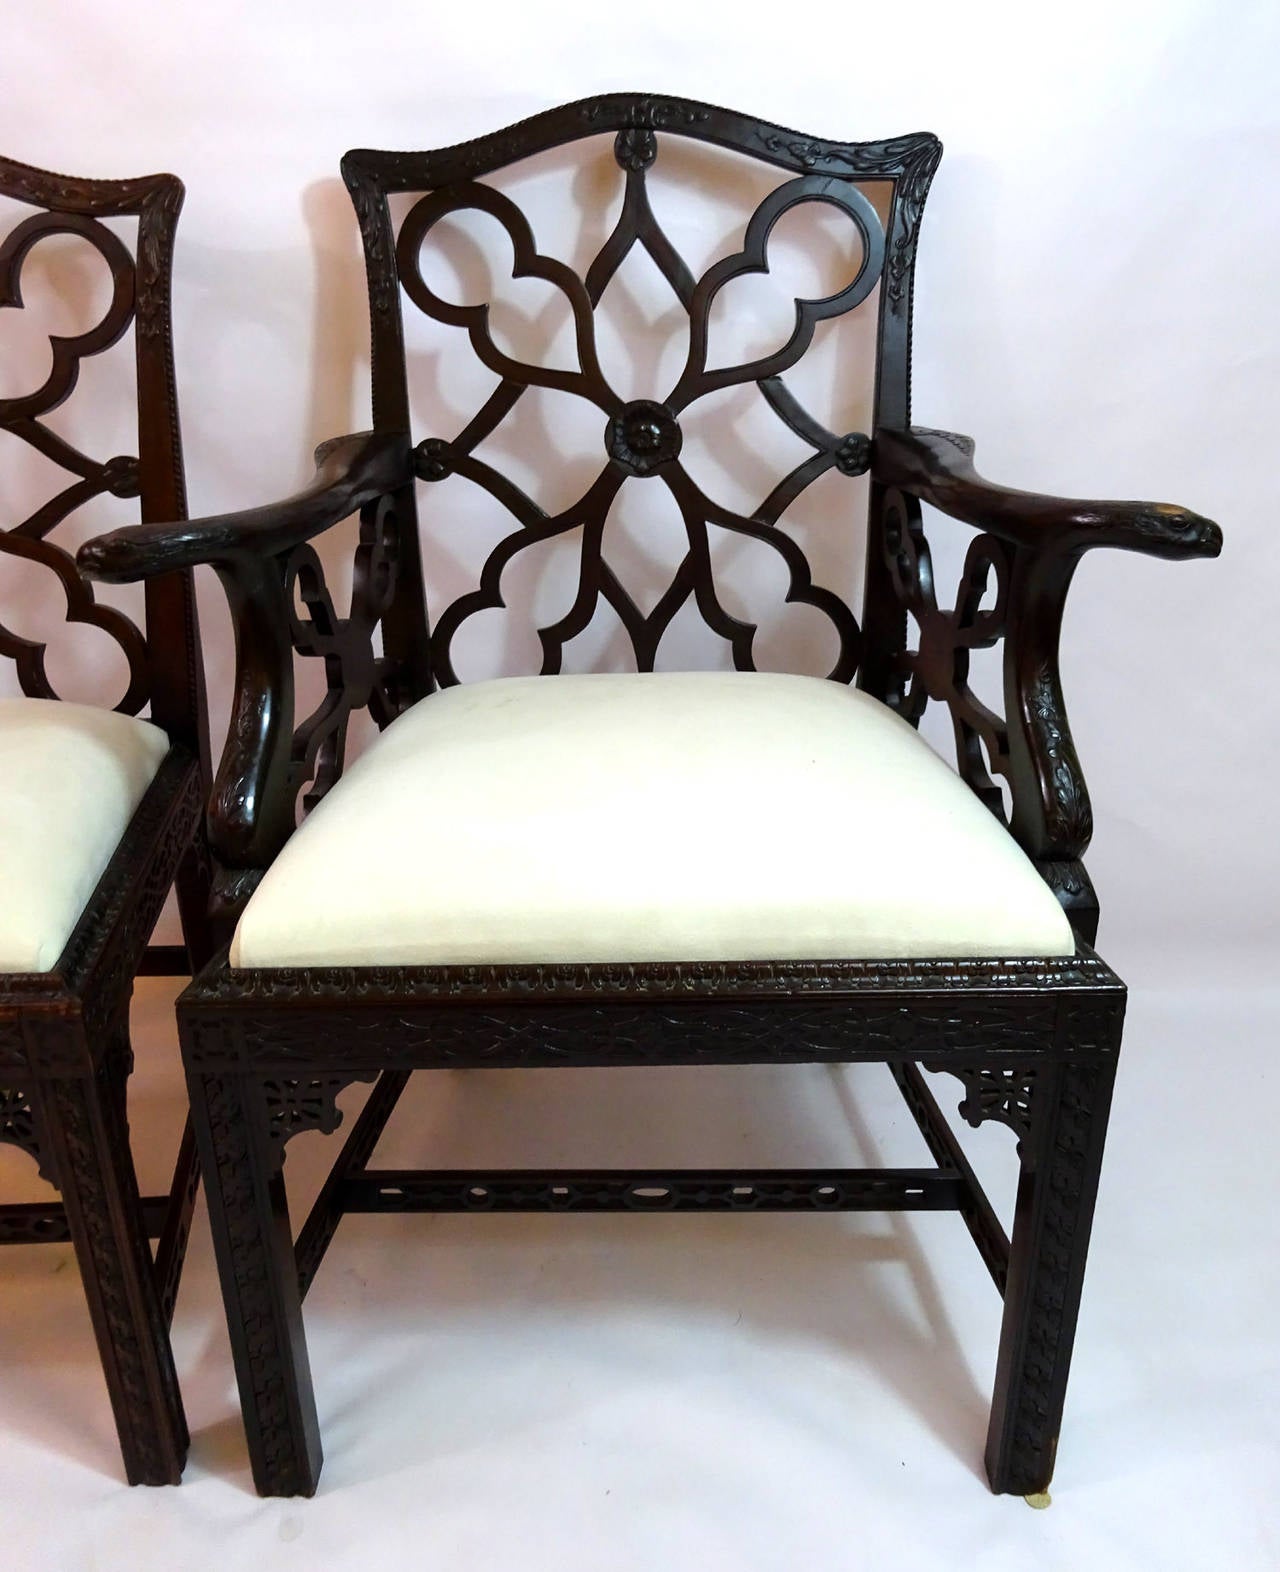 Set of eight dining chairs consisting of two armchairs and six side chairs, crafted in the late 19th century in England. The frames are made of mahogany with an unusually designed back.